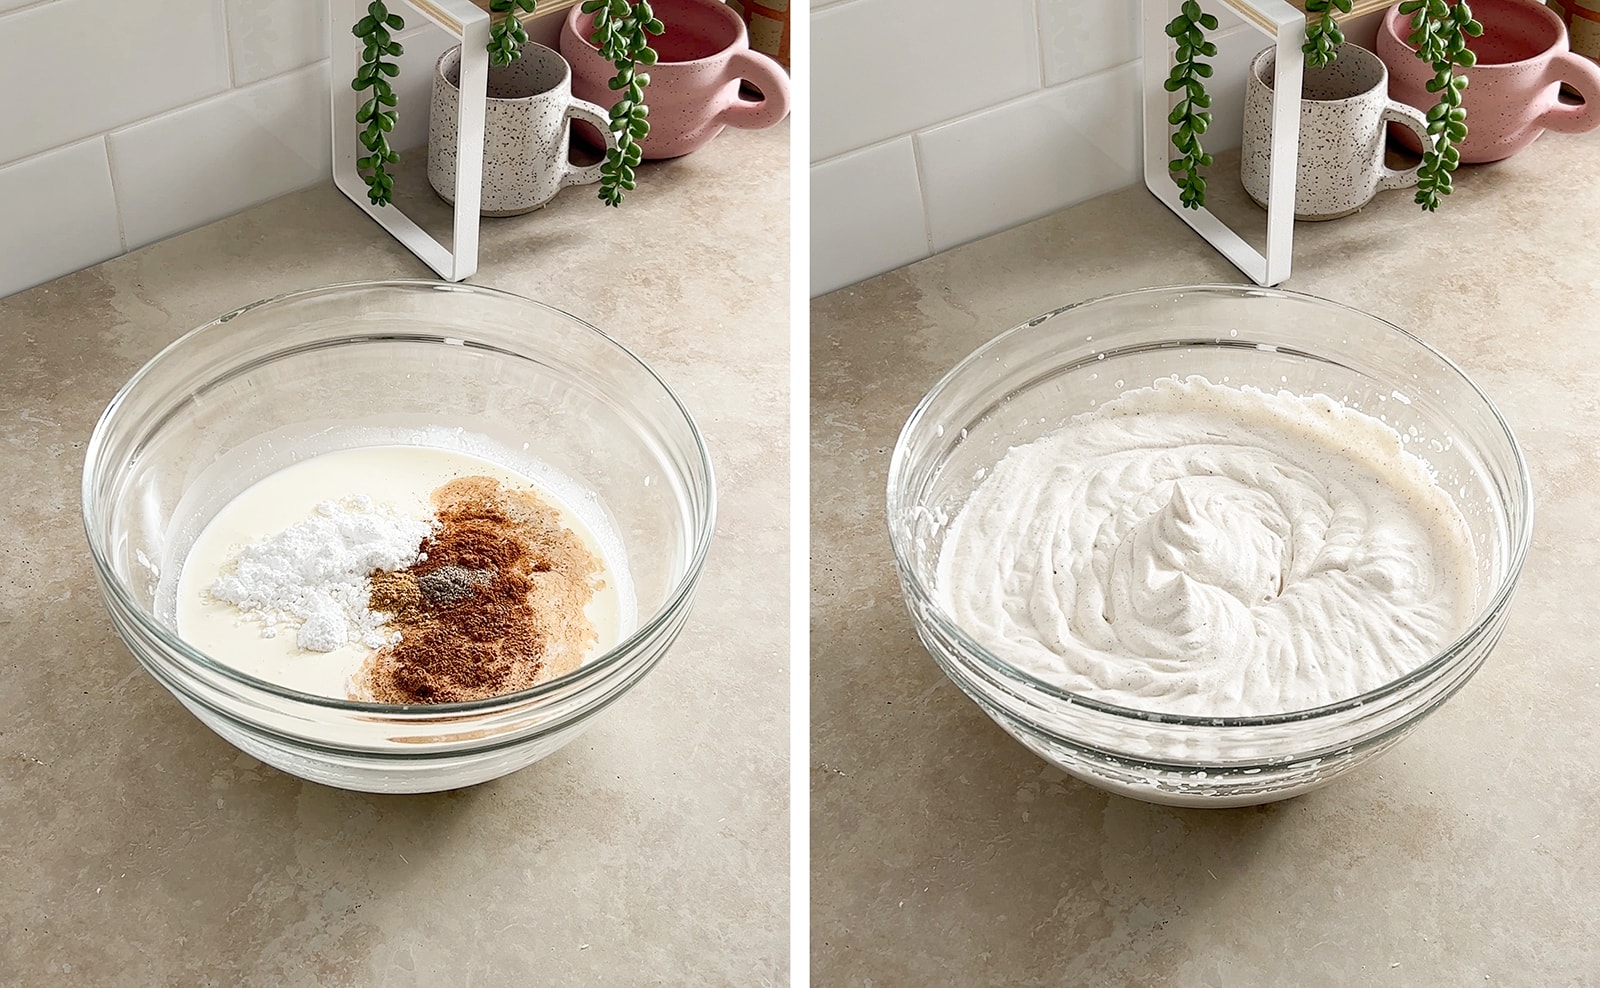 Left to right: bowl of whipping cream and spices, whipped cream in a mixing bowl.